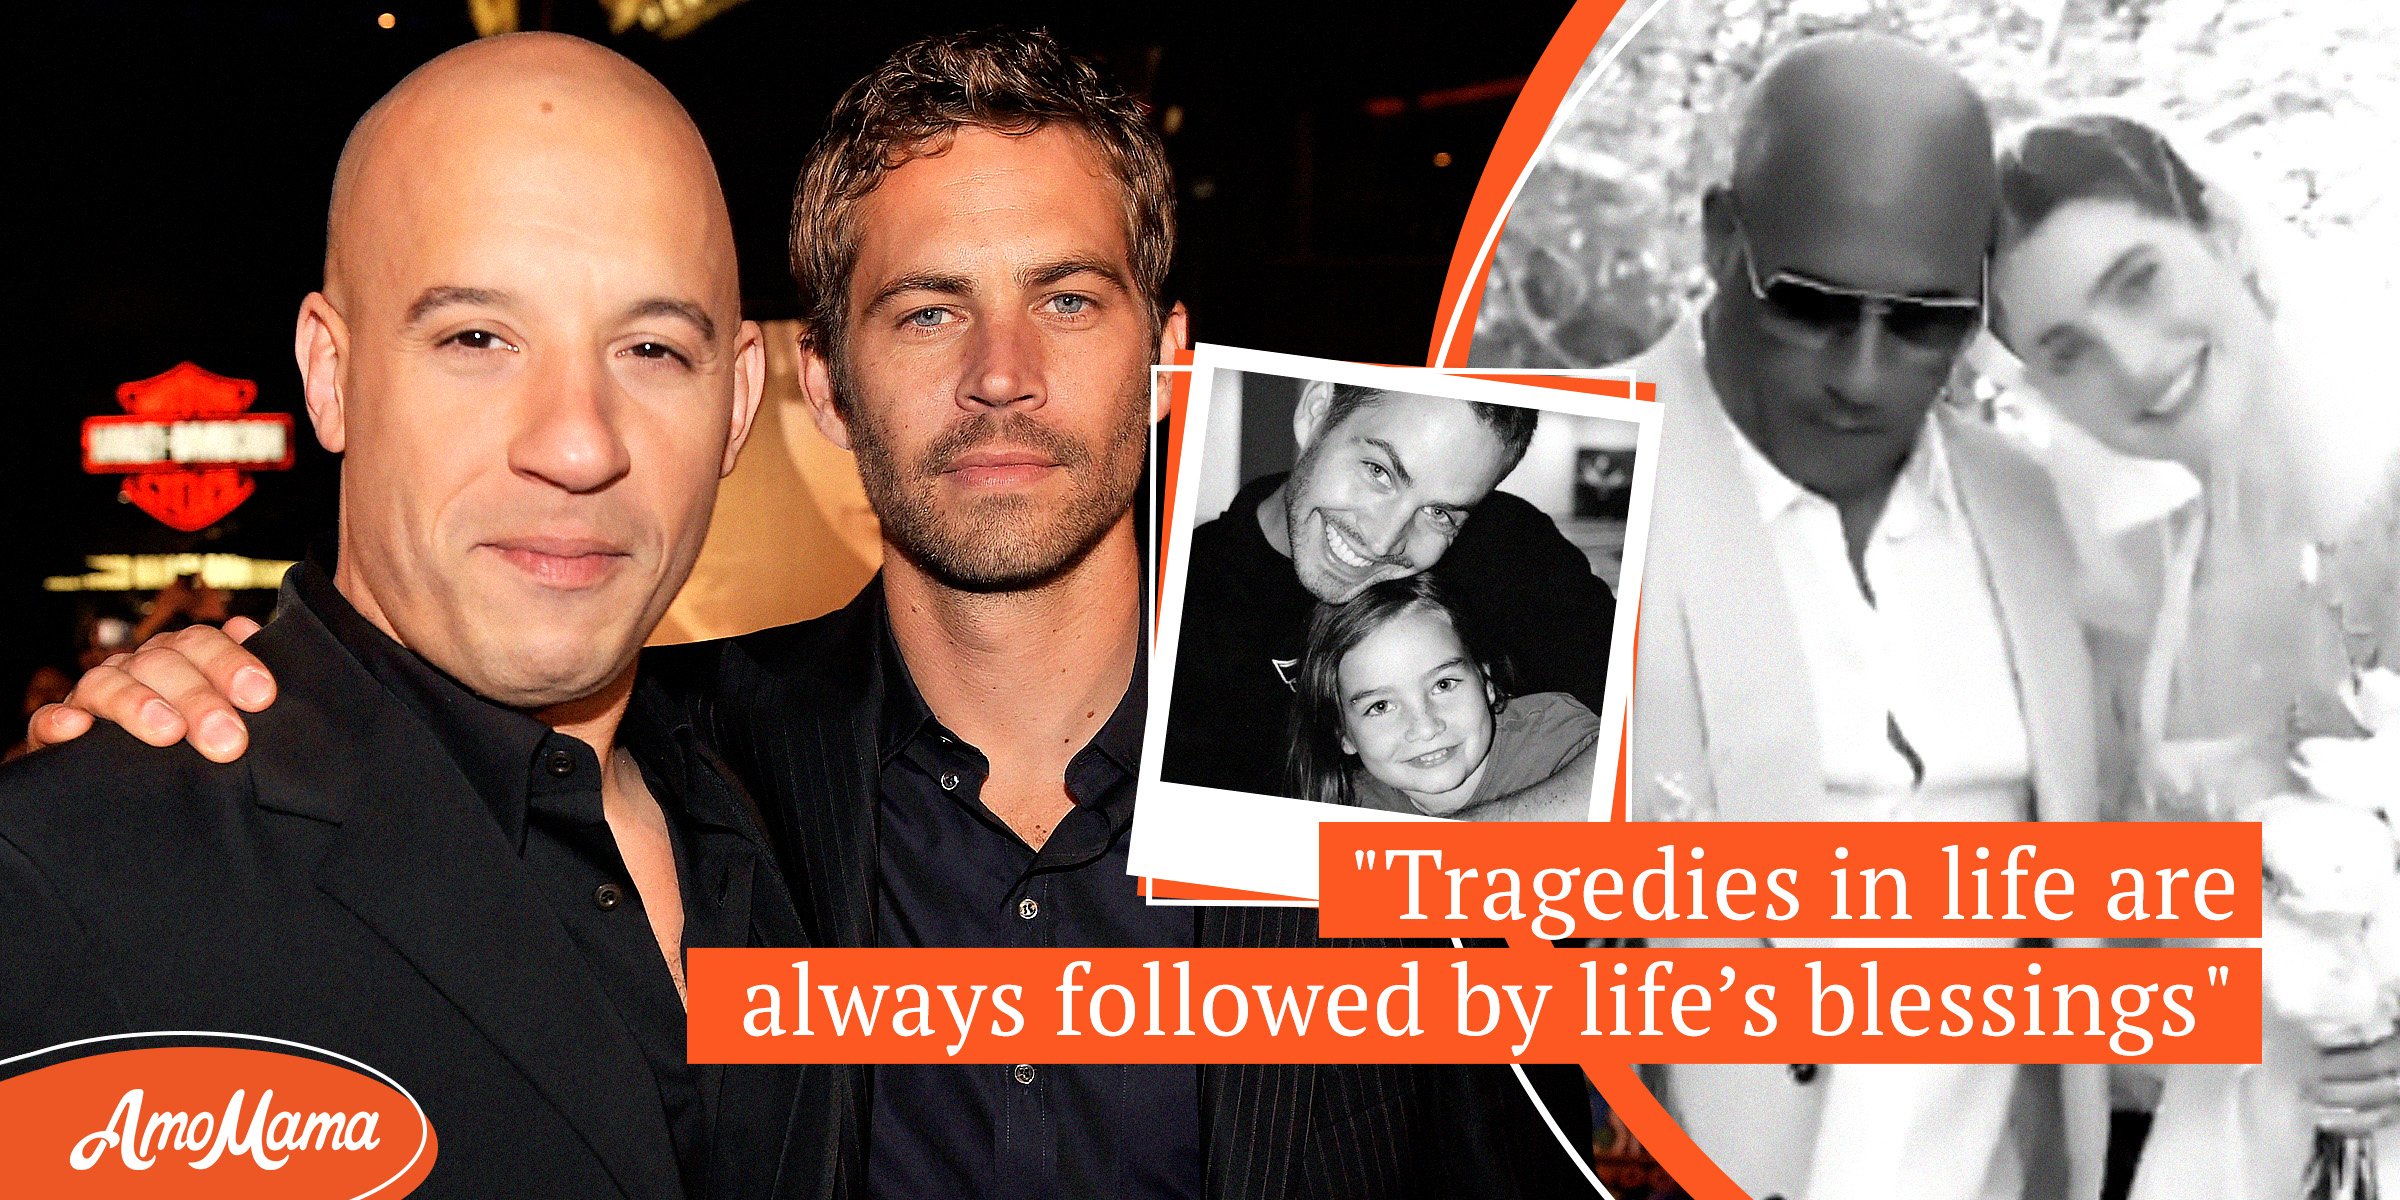 Vin Diesel Walked Paul Walker’s Daughter Down the Aisle as Her Uncles Are Not Very ‘Close’ to Her